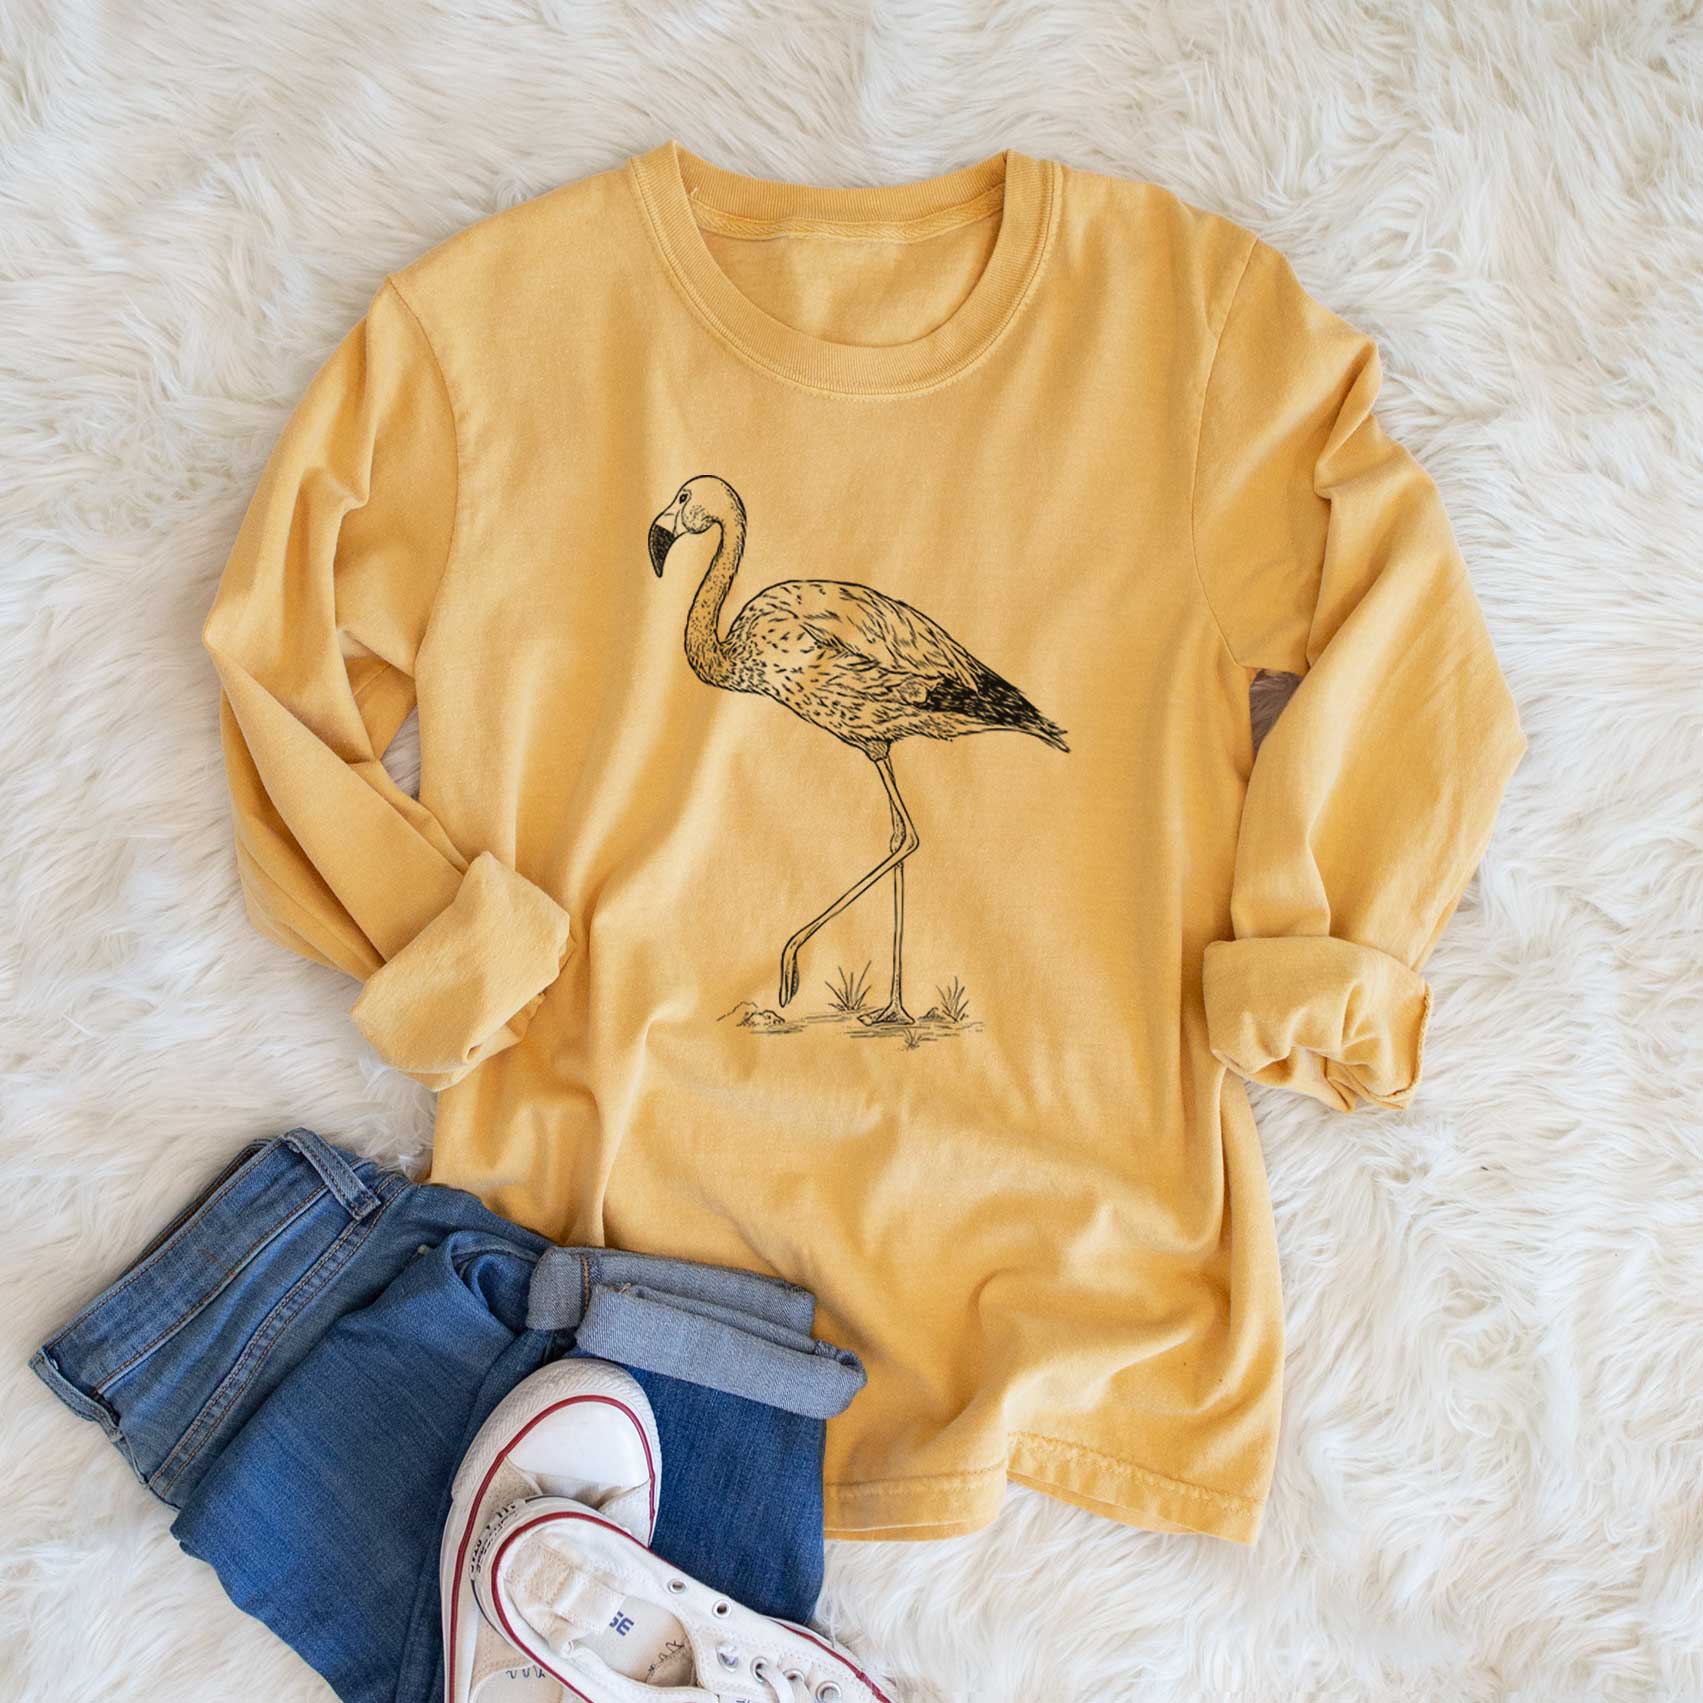 Andean Flamingo shirt with long sleeves